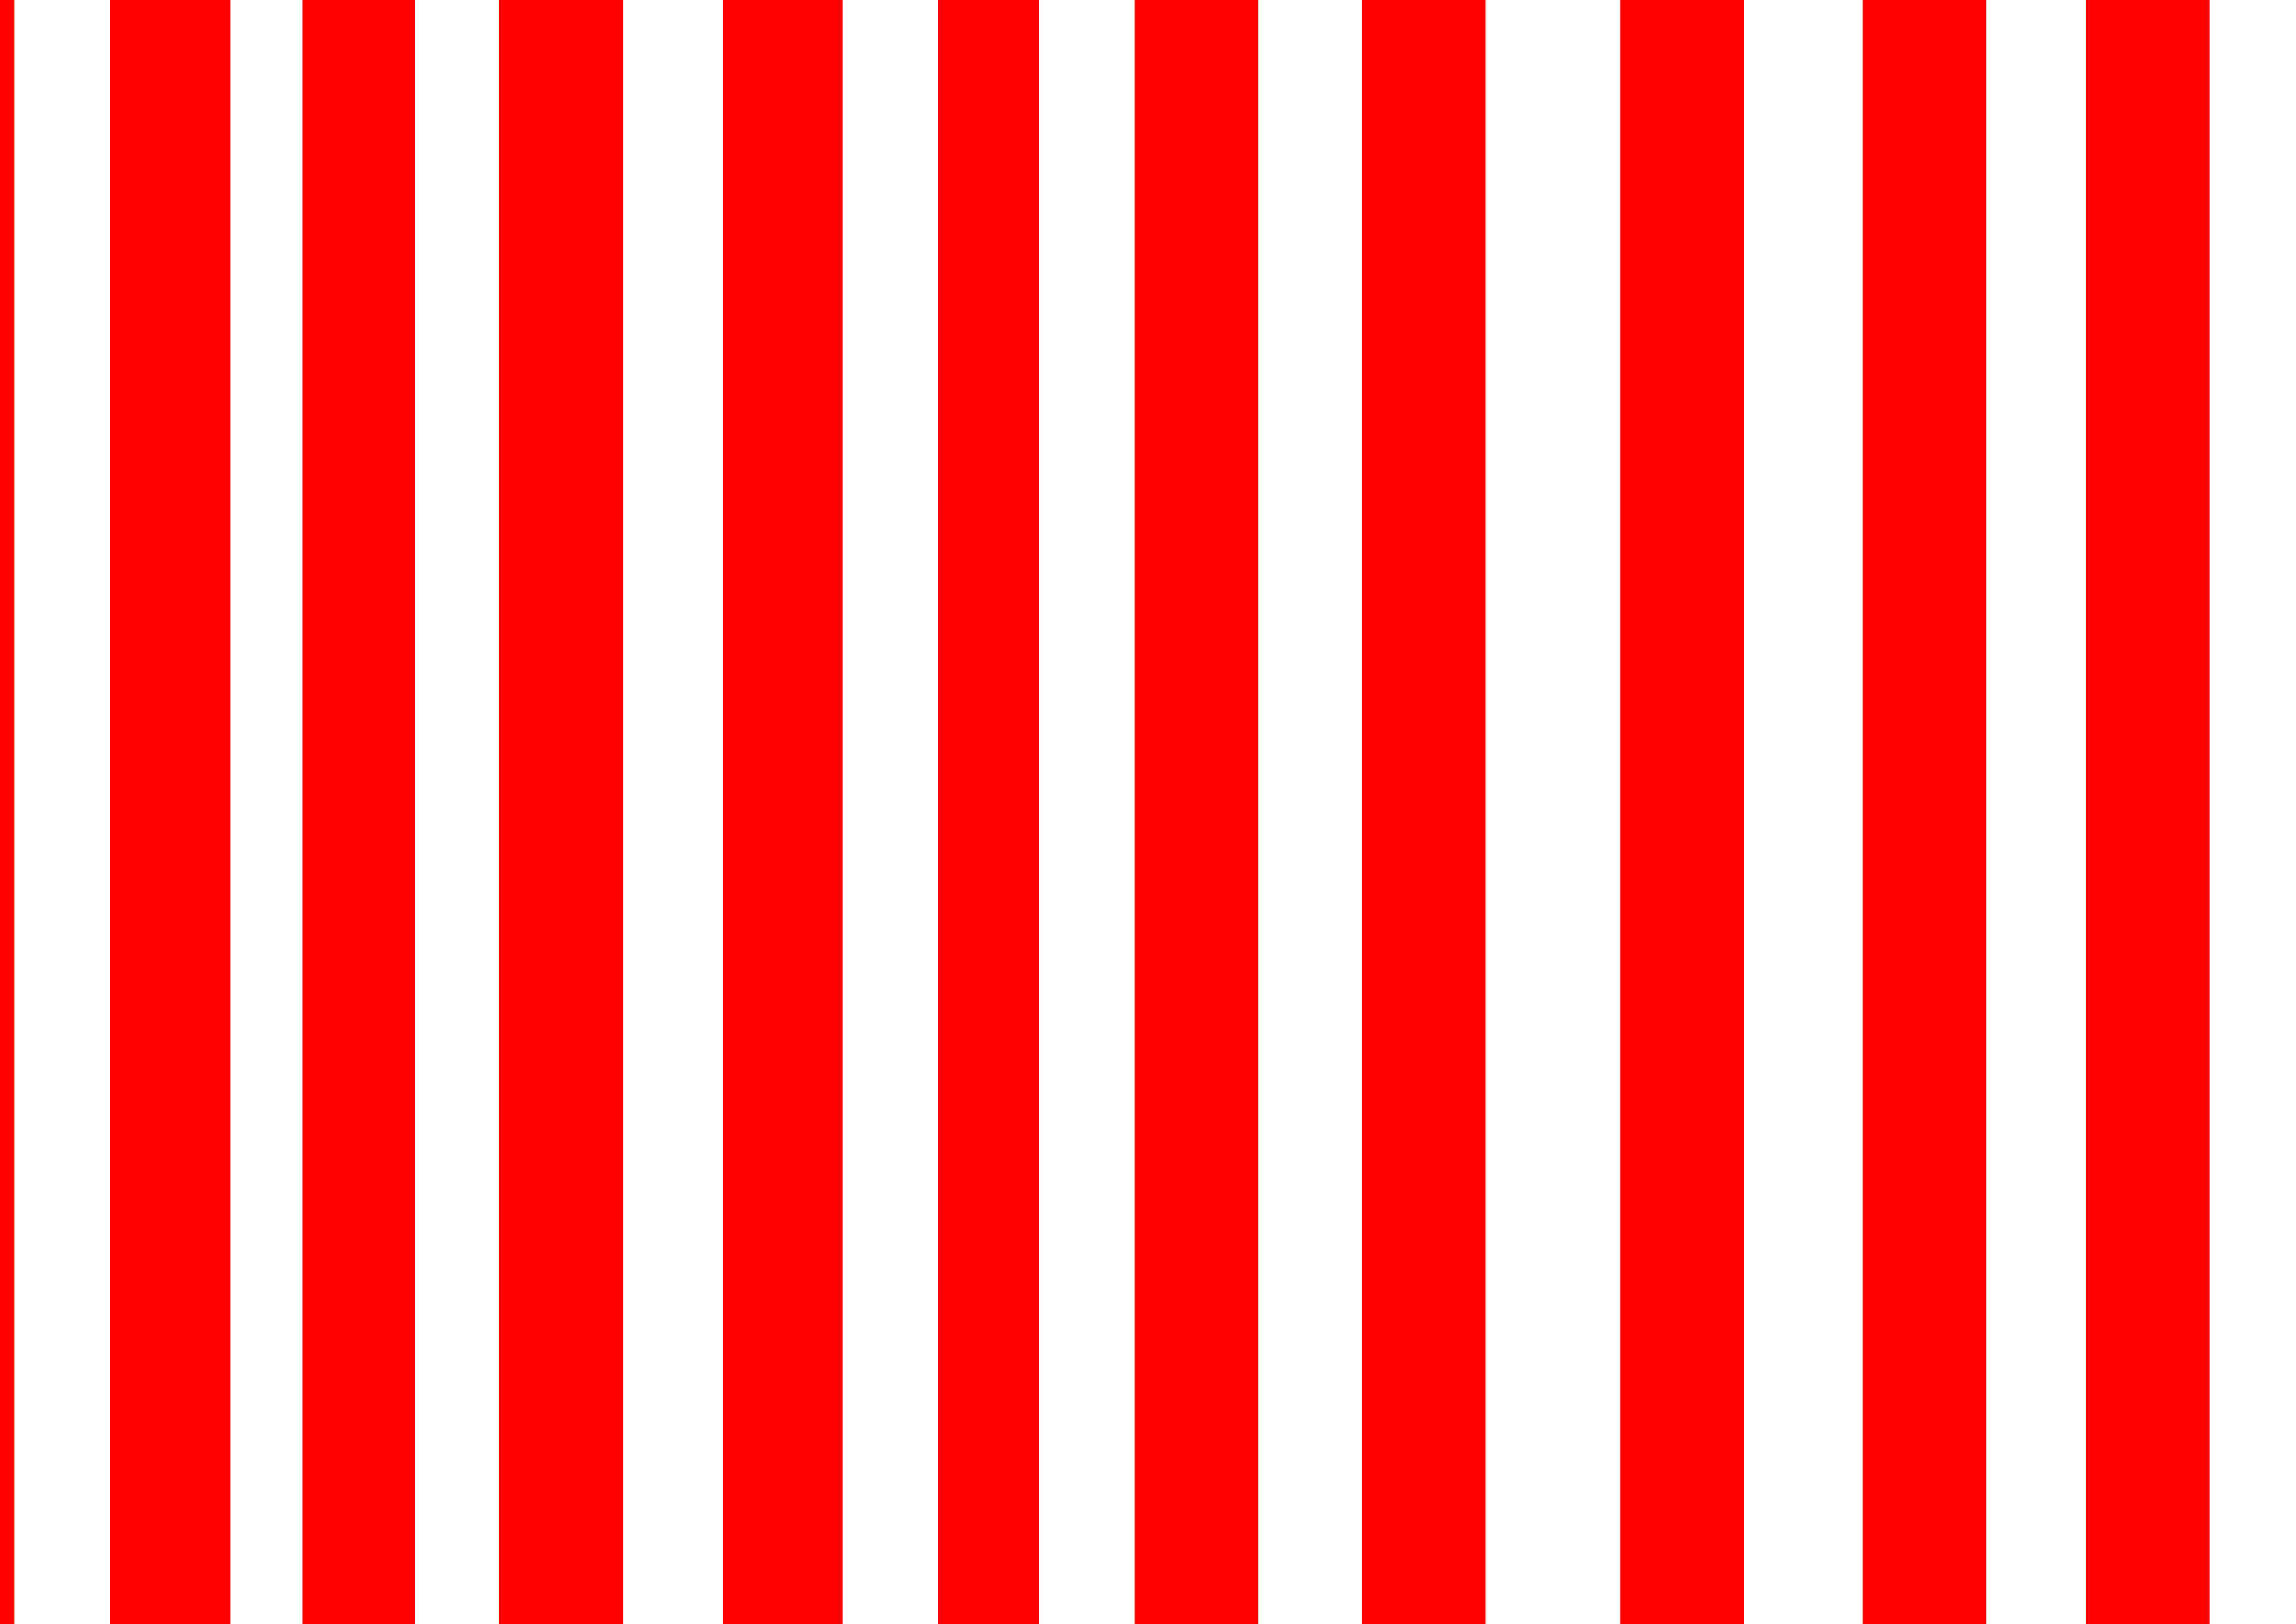 red white striped group picture image by tag keywordpicturescom